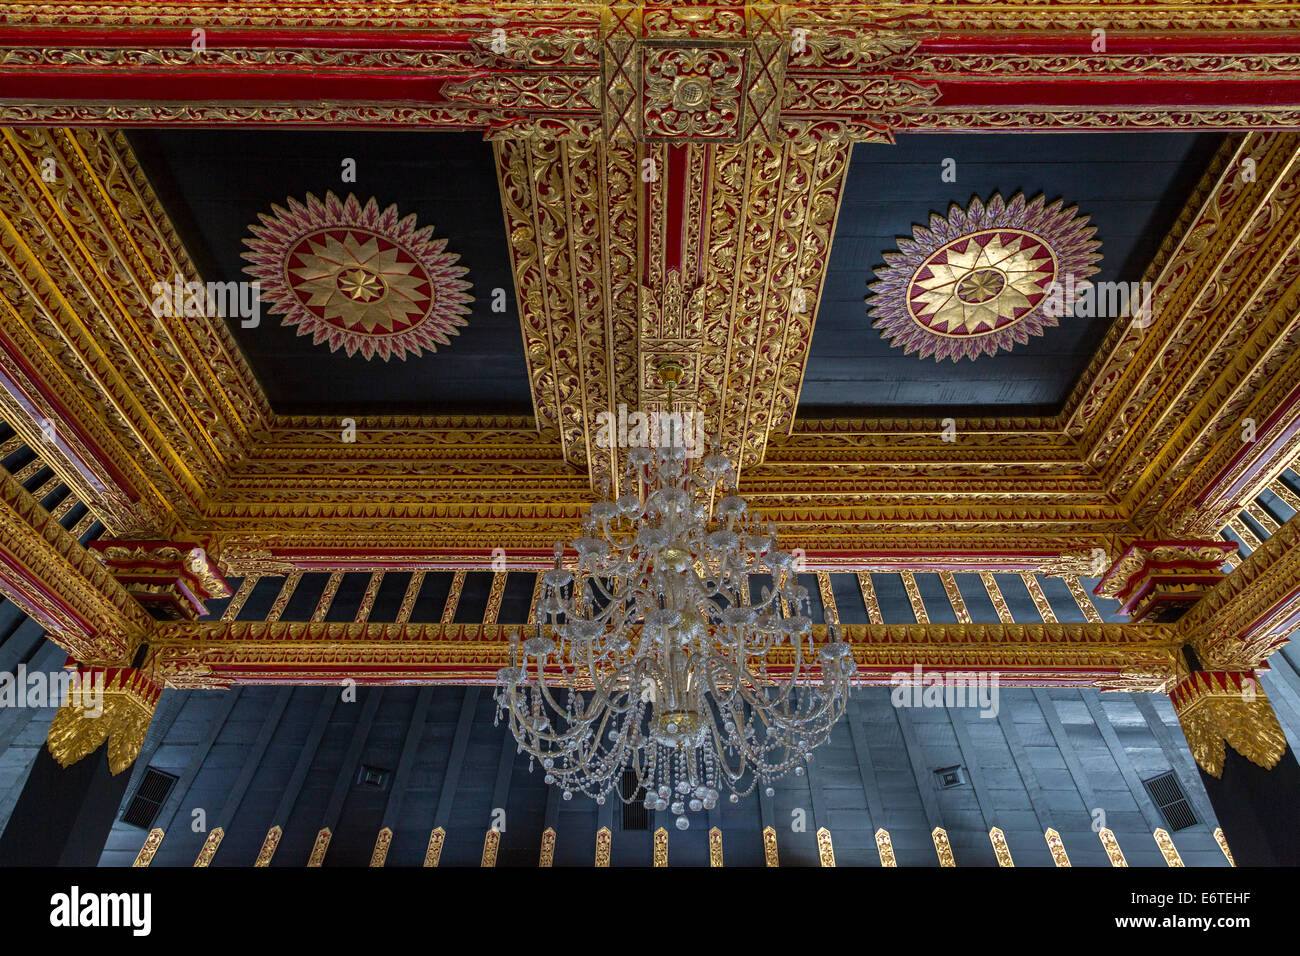 Yogyakarta, Java, Indonesia.  Chandelier and Ceiling of Entrance Hall to the Museum, Sultan's Palace. Stock Photo